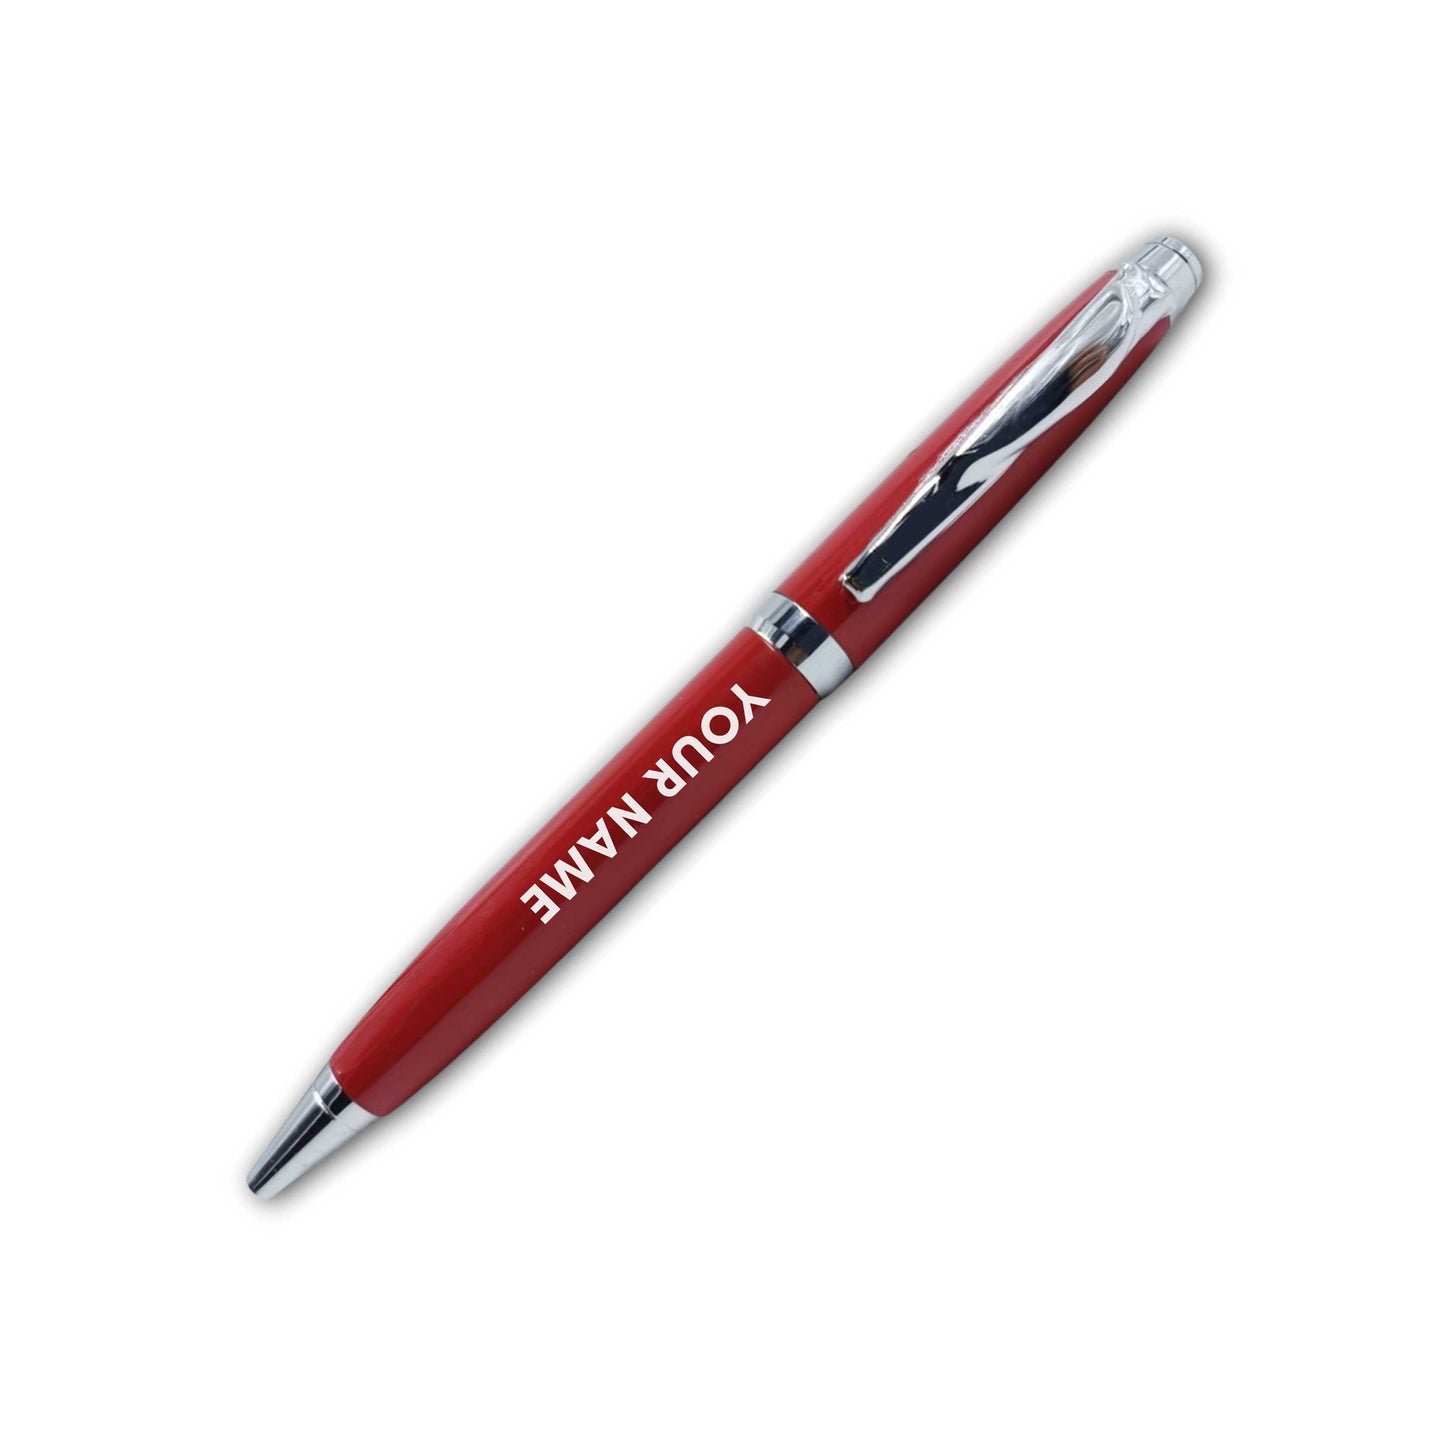 Engraved Custom Pen Gift Set For for Boss Office Colleagues (Red) - Add Name